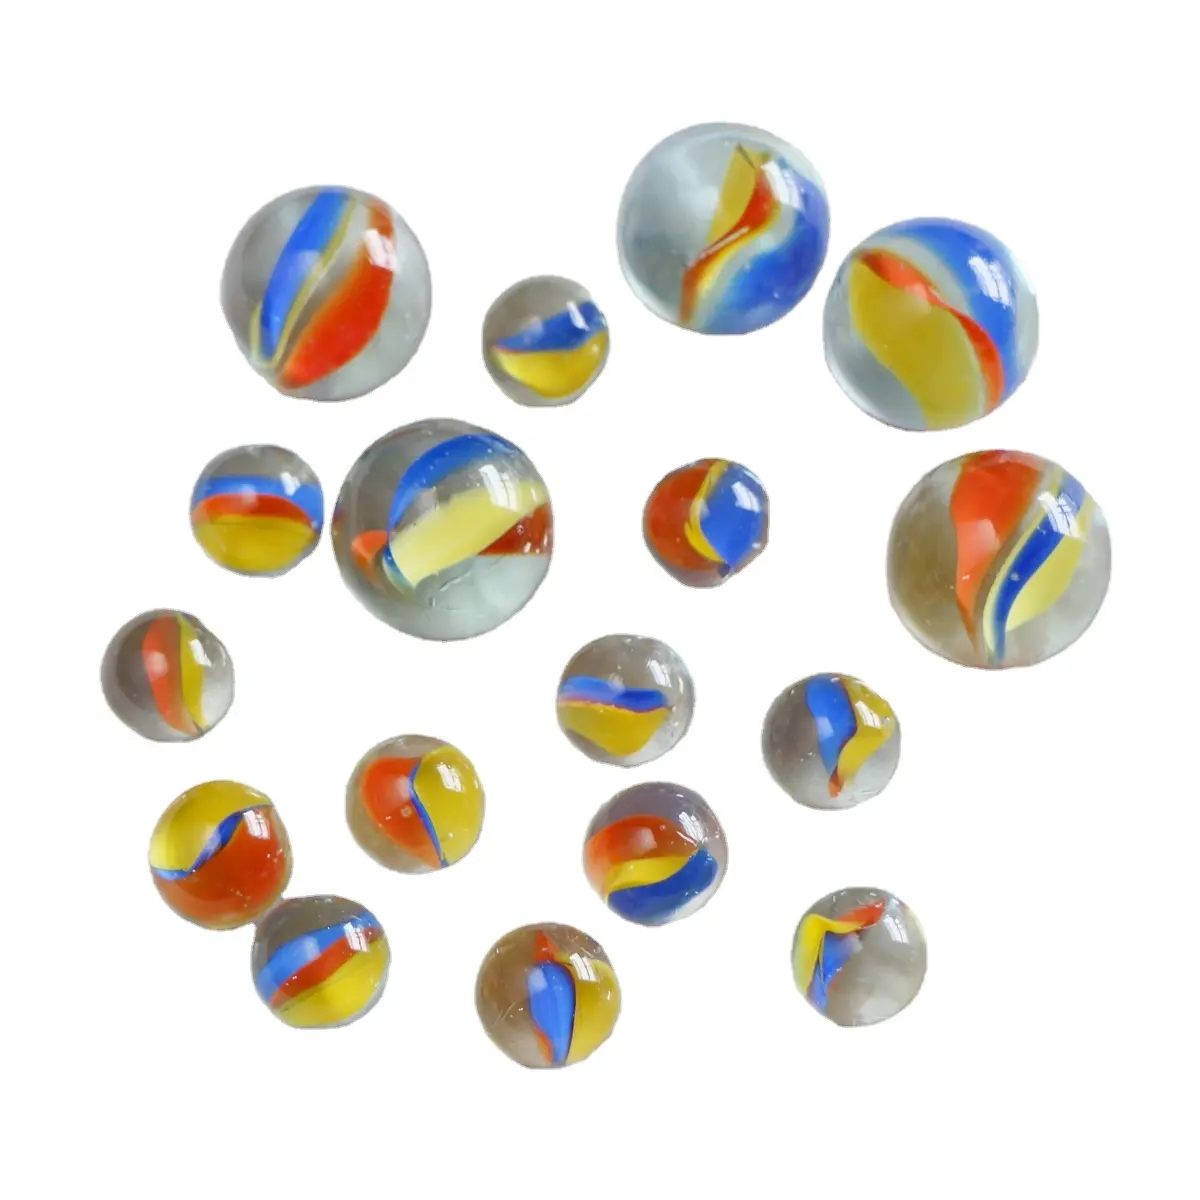 Cheap14mm 16mm 25mm toy glass ball marbles with petal design for kid's playing and DIY ornament